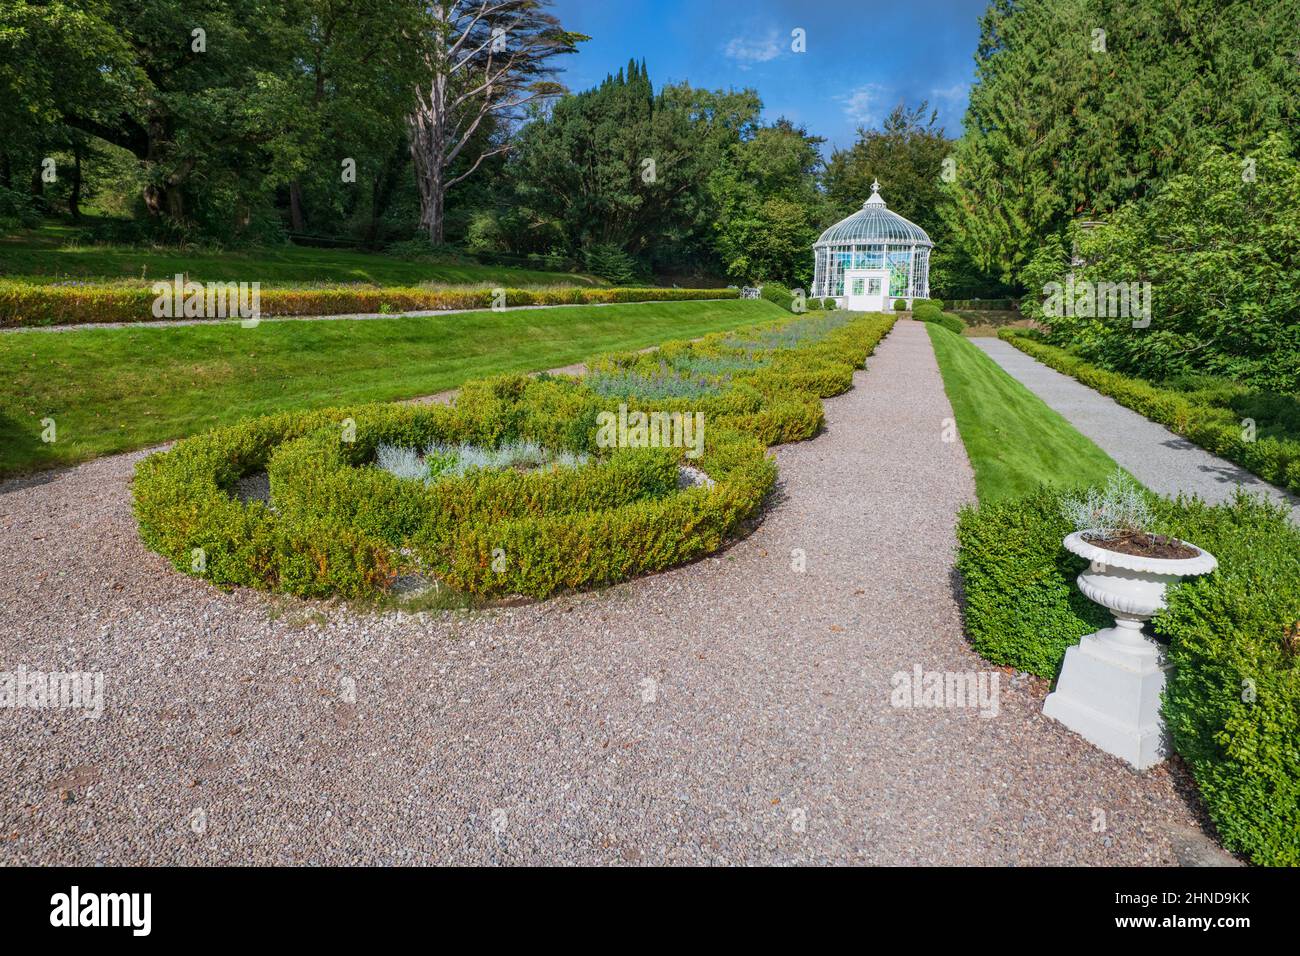 Ireland, County Kilkenny, Inistioge, Woodstock Gardens, The Richard Turner Conservatory dating from the 1850's and now being used as the tourist attra Stock Photo